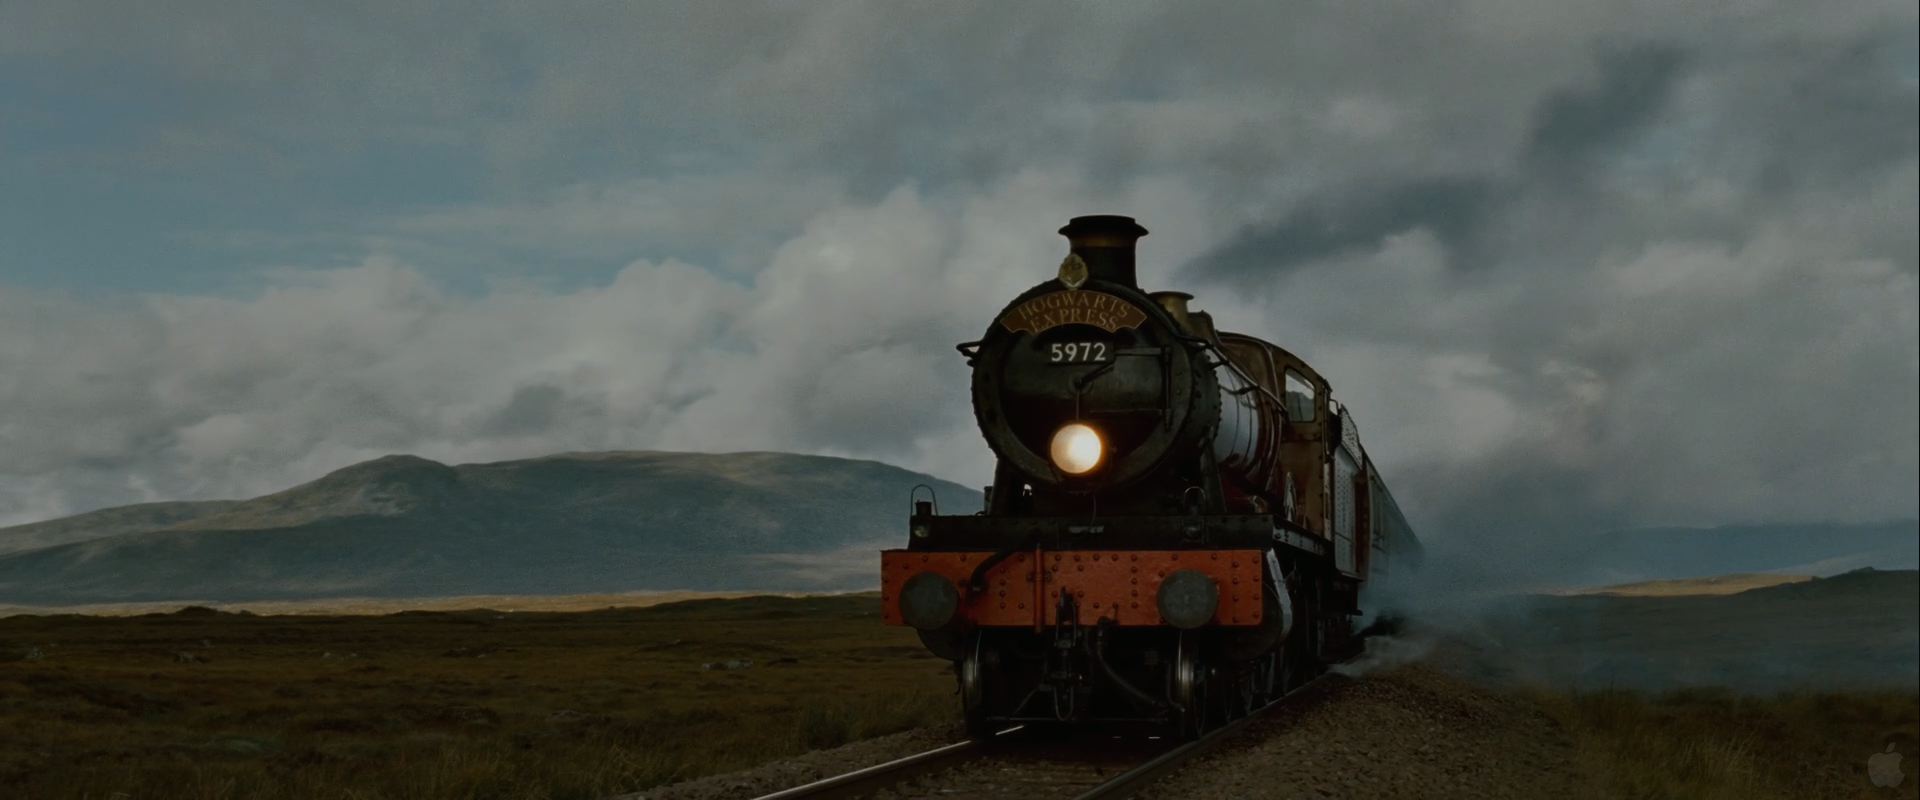 Hogwarts Express Train from Harry Potter and the Deathly Hallows Desktop  Wallpaper